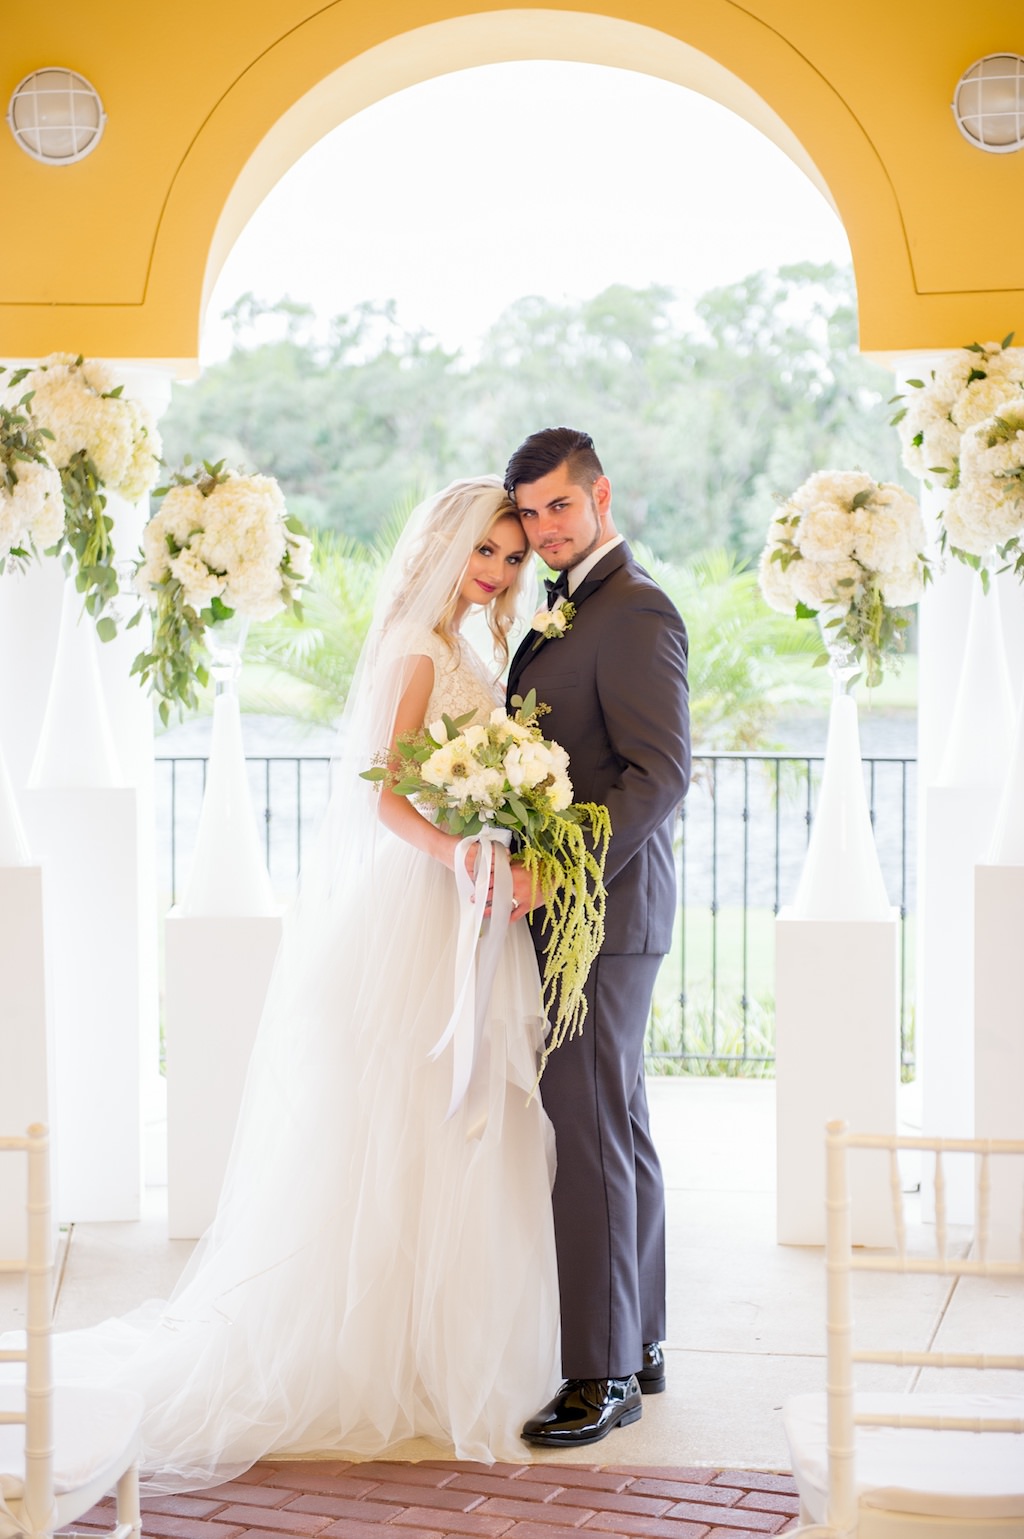 Elegant Wedding Ceremony Portrait with Tall Hydrangea Florals with Greenery in Bold White Vases on Pedestal, Bride in Ballgown Wedding Dress from Bridal Boutique The Bride Tampa, Groom in Grey Tuxedo | Tampa Bay Country Club Wedding Venue The Palms Tampa Golf & Country Club | Tampa Wedding and Event Planner Love Lee Lane | Florist and Rentals Gabro Event Services